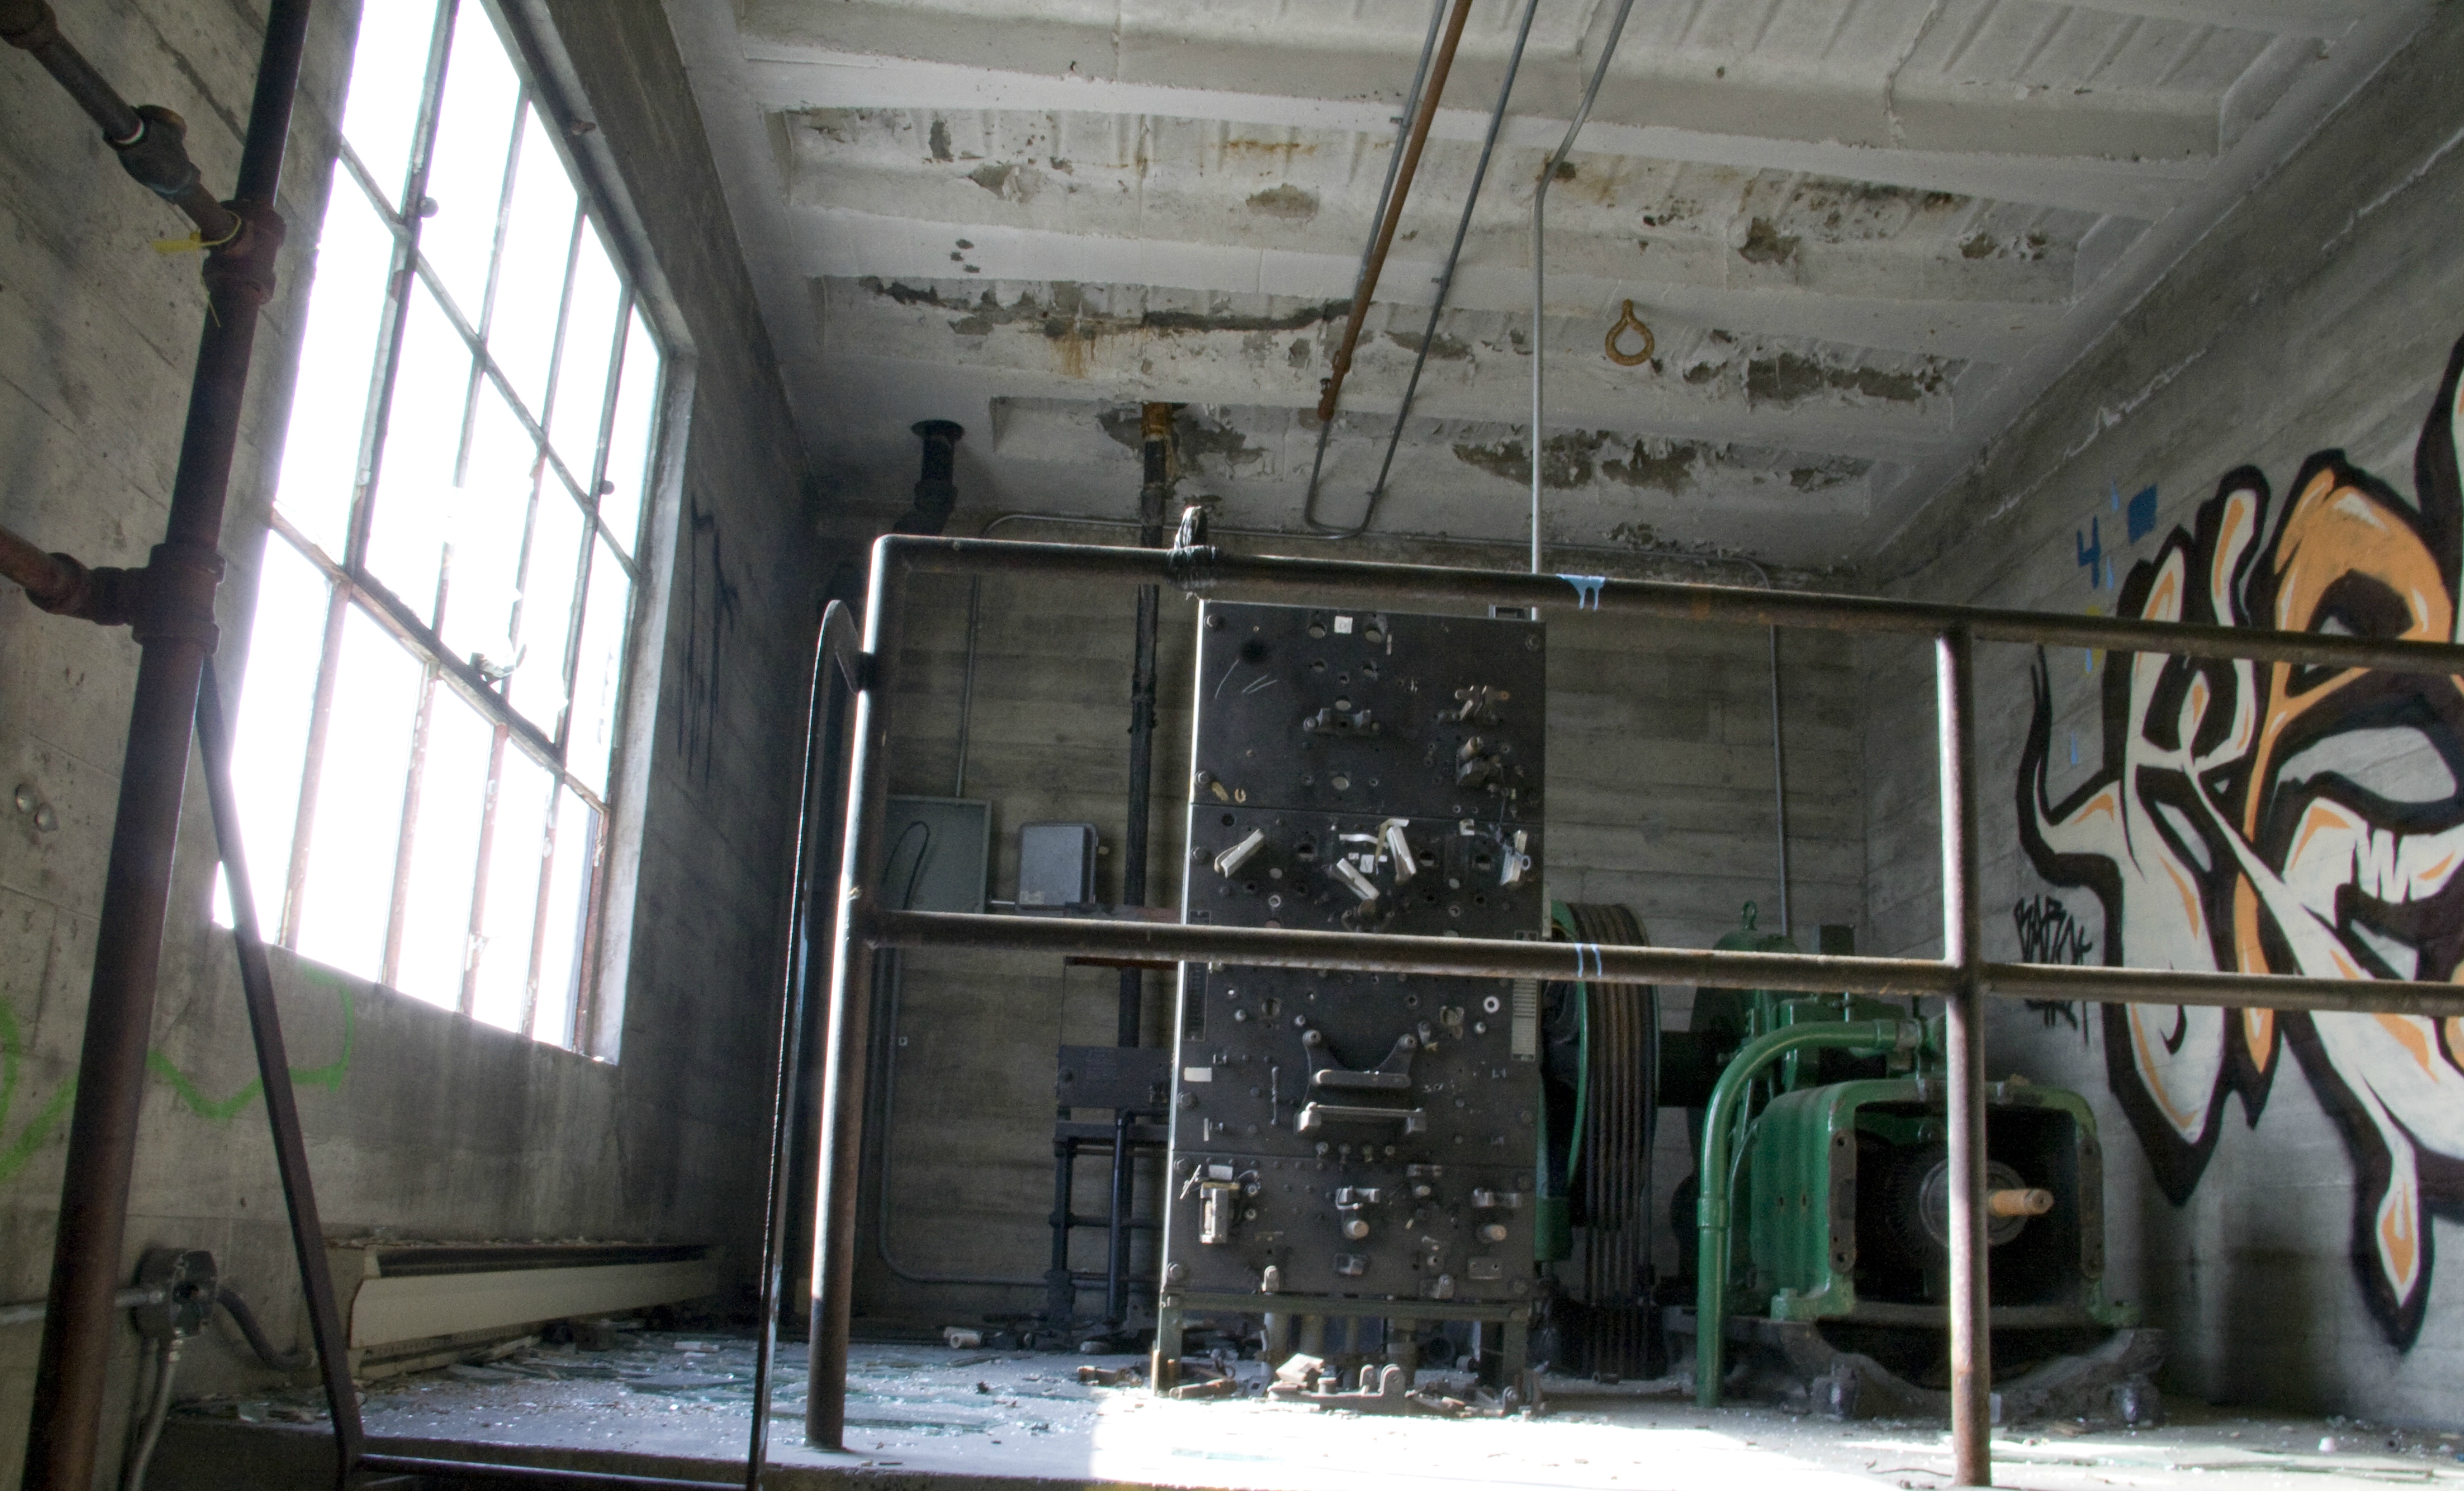 TOP FLOOR - some old equipment still occupies the highest spot in the building.